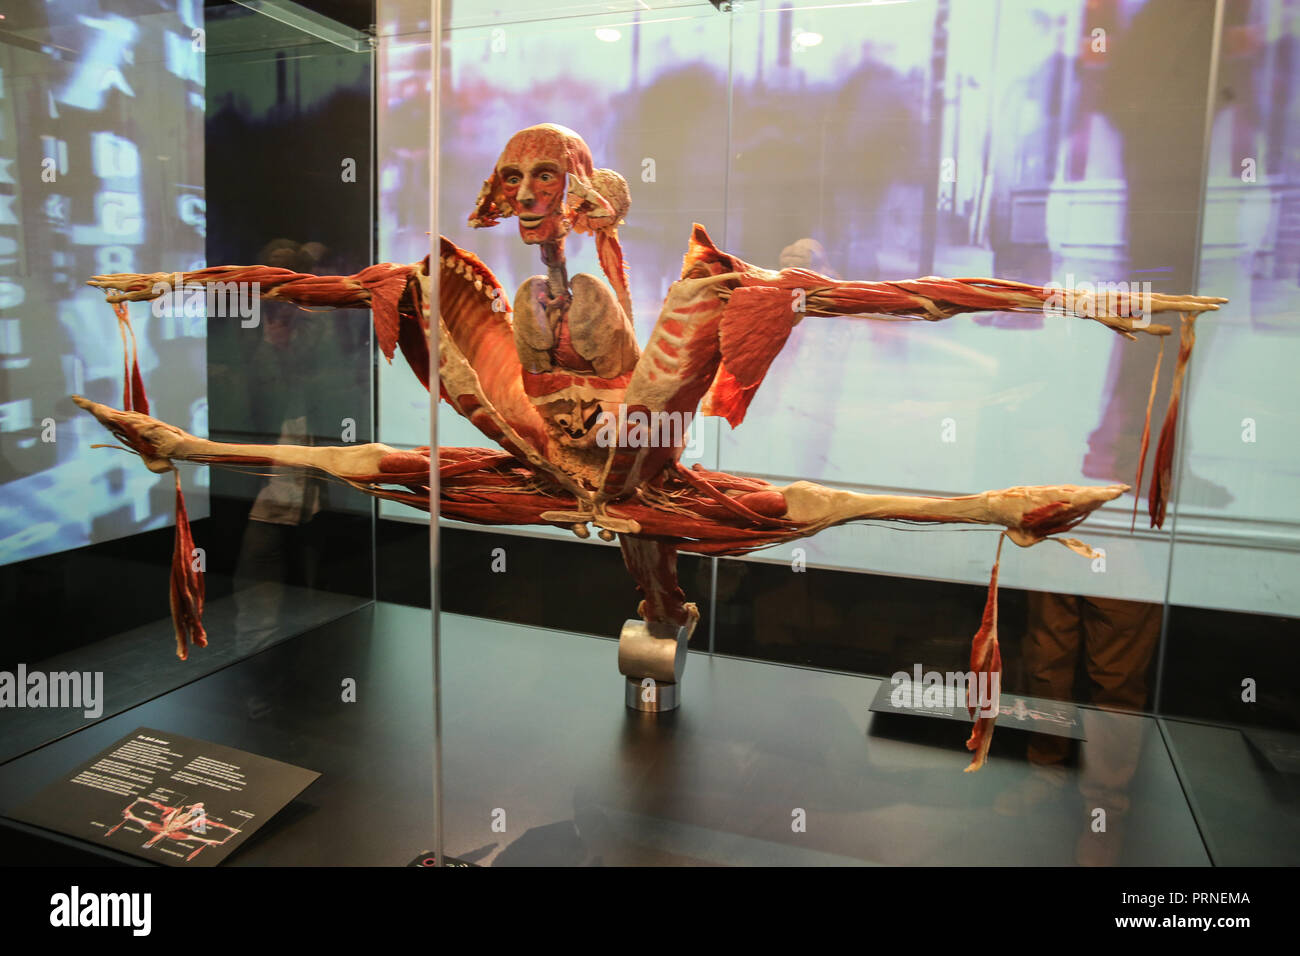 London Uk 04 October 2018 BODY WORLDS creating a permanent London flagship  for the world's most popular touring exhibition in the magnificent London  Pavilion. The fusion of science, art and health education